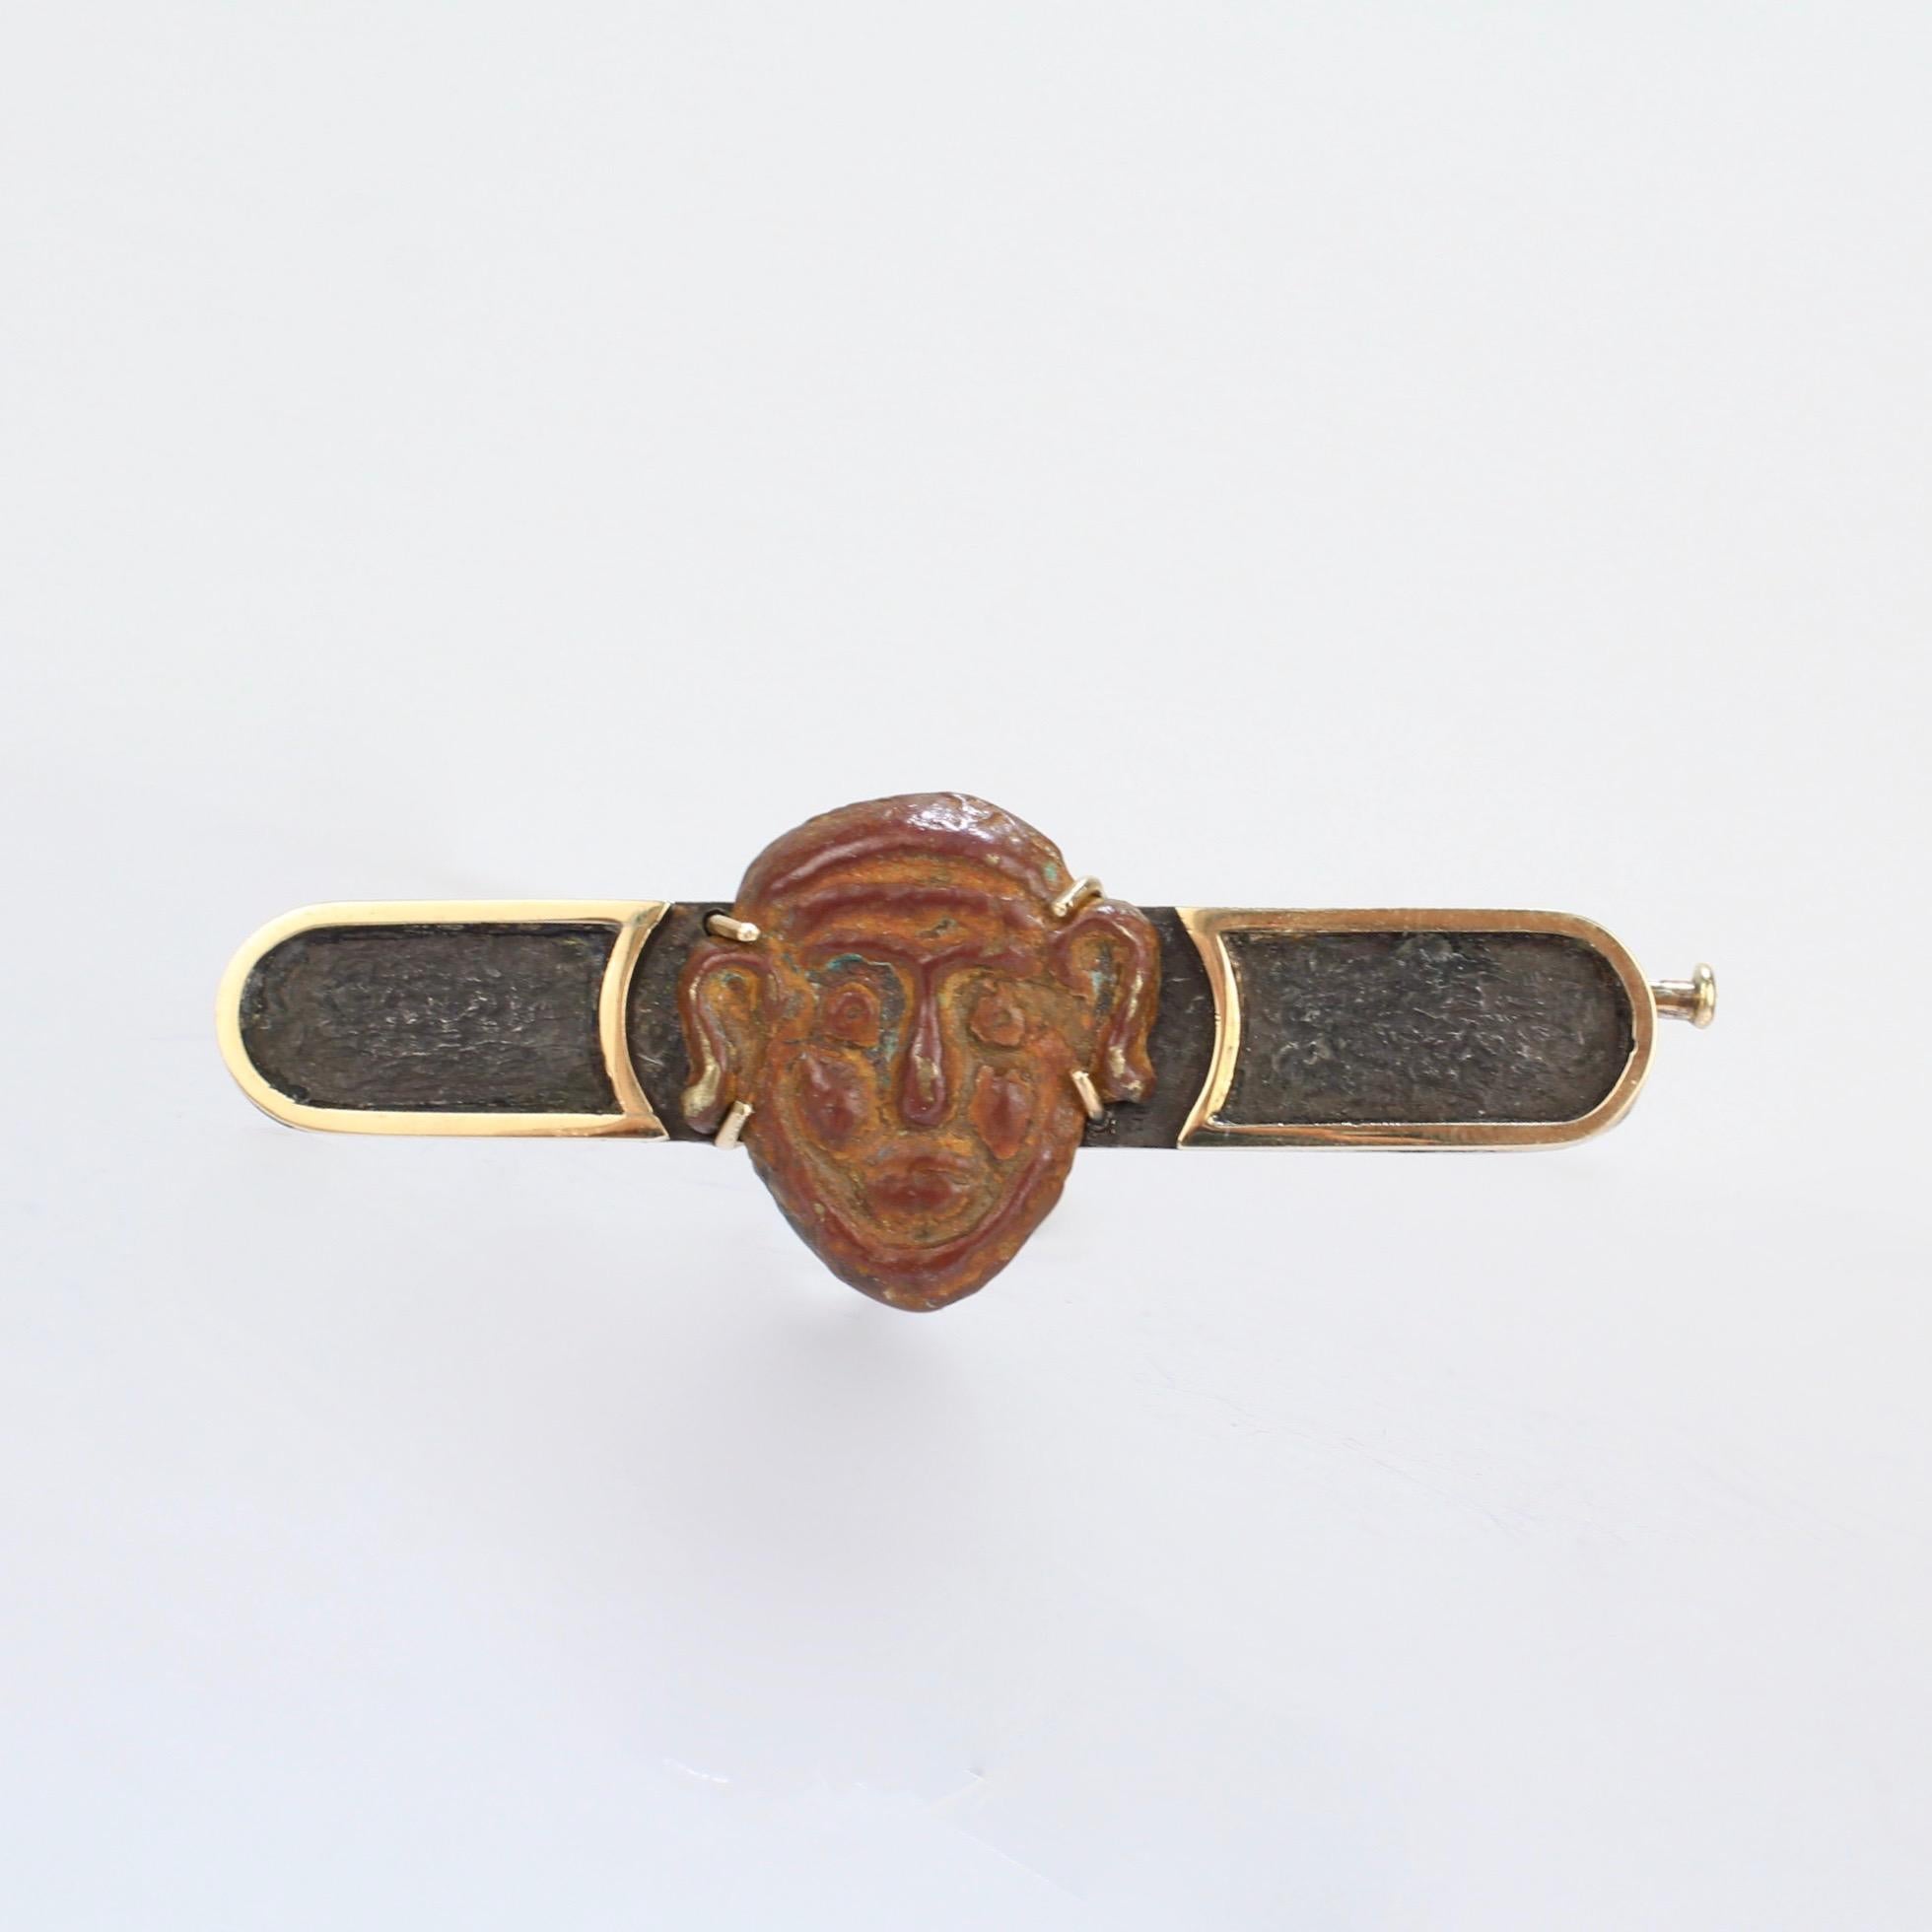 A wonderful bar pin by Paul Haig, the long-established and well-renowned custom jeweler and Asian dealer from Rochester, Michigan.

Comprised of a small bronze Japanese mask (probably from a Noh play) set on a liver sulfured silver bar pin with 14K